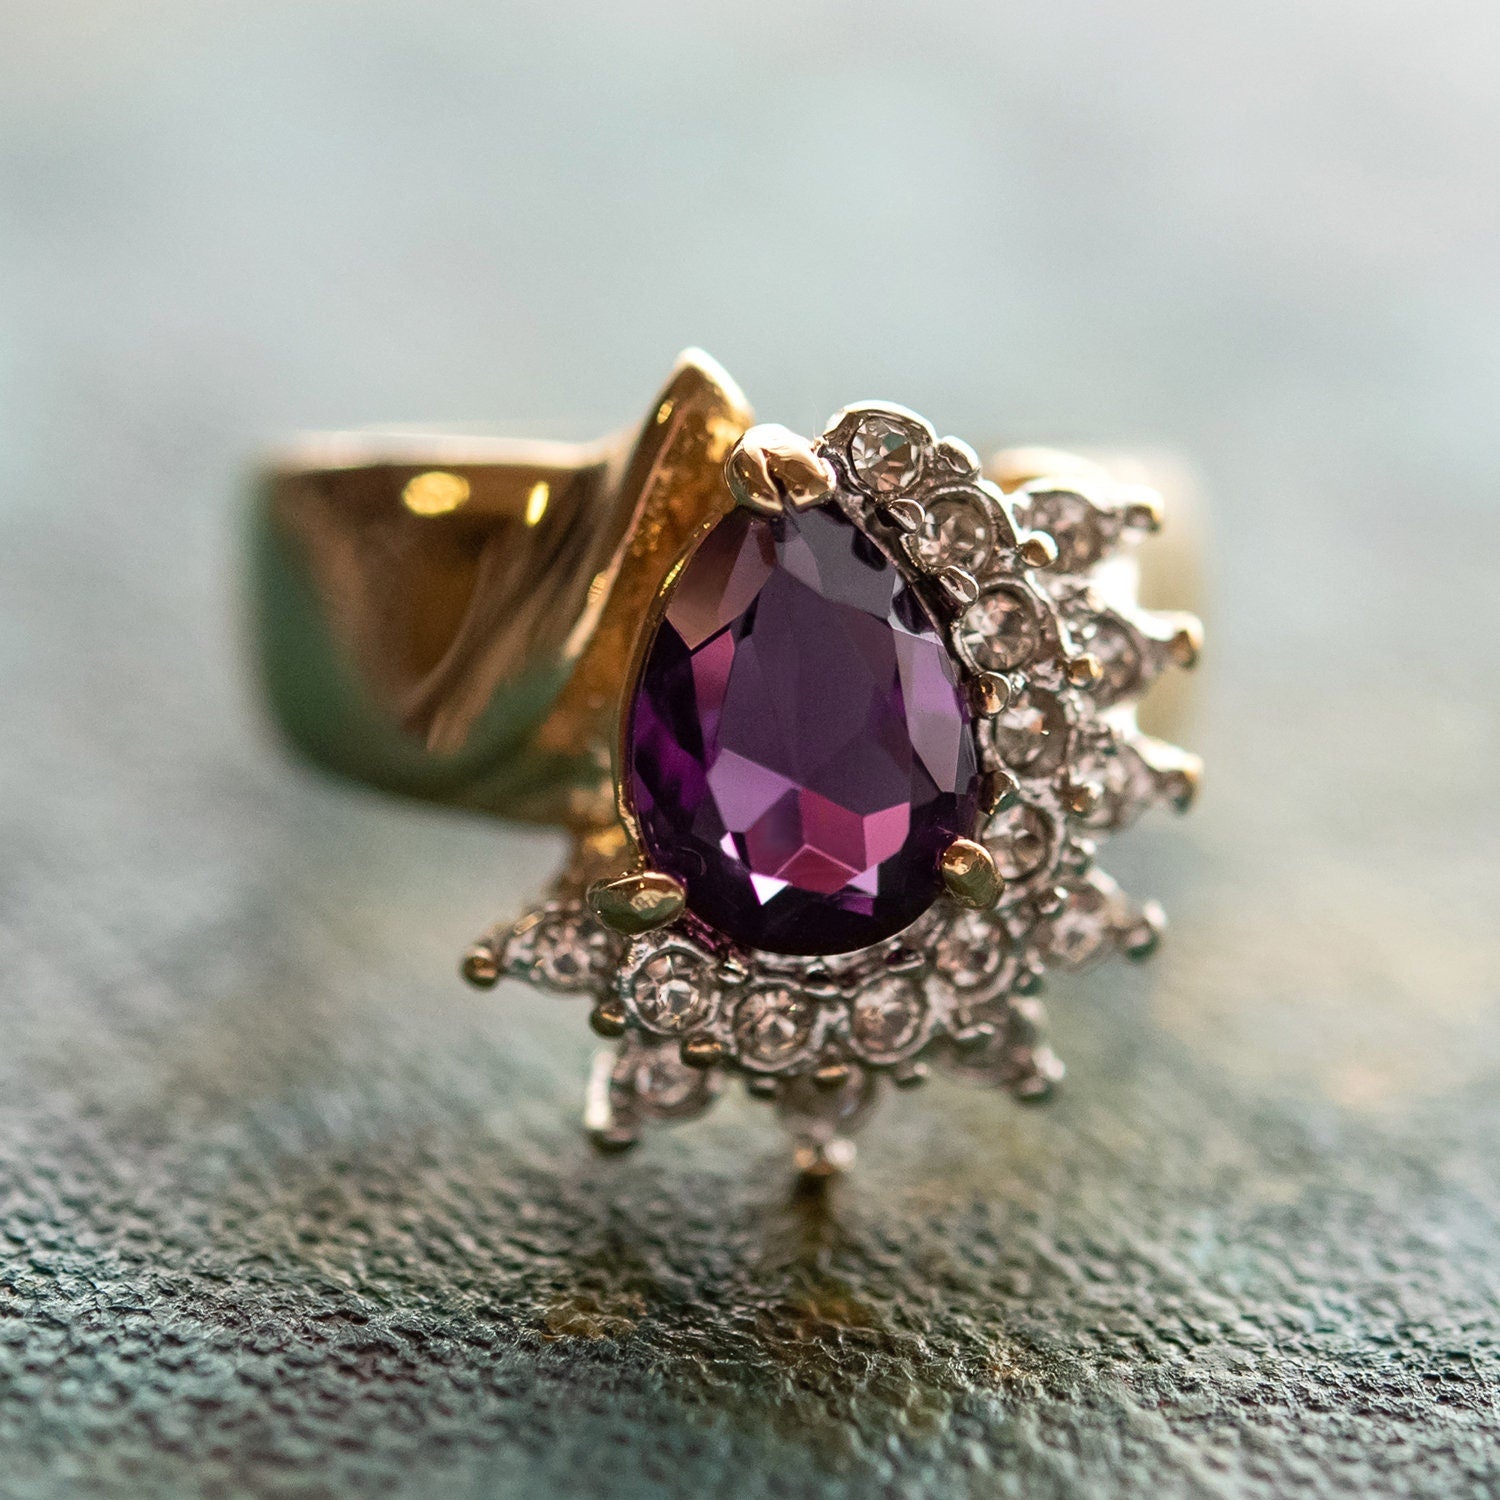 Vintage Ring Amethyst Cubic Zirconia and Clear Swarovski Crystals 18kt Gold  #R3163 - Limited Stock - Never Worn